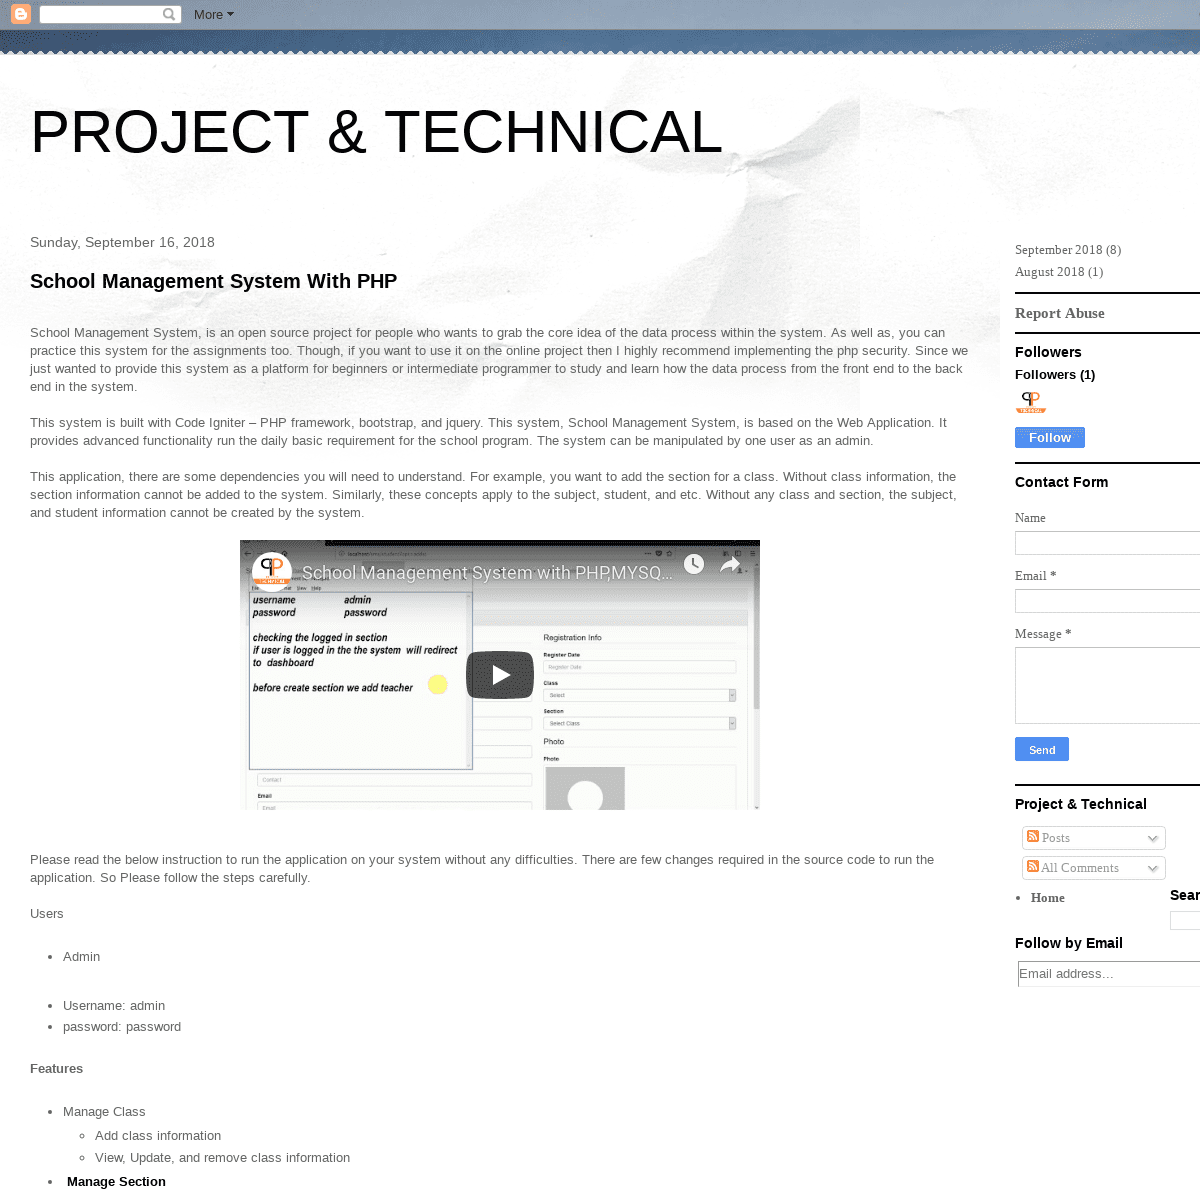 PROJECT & TECHNICAL